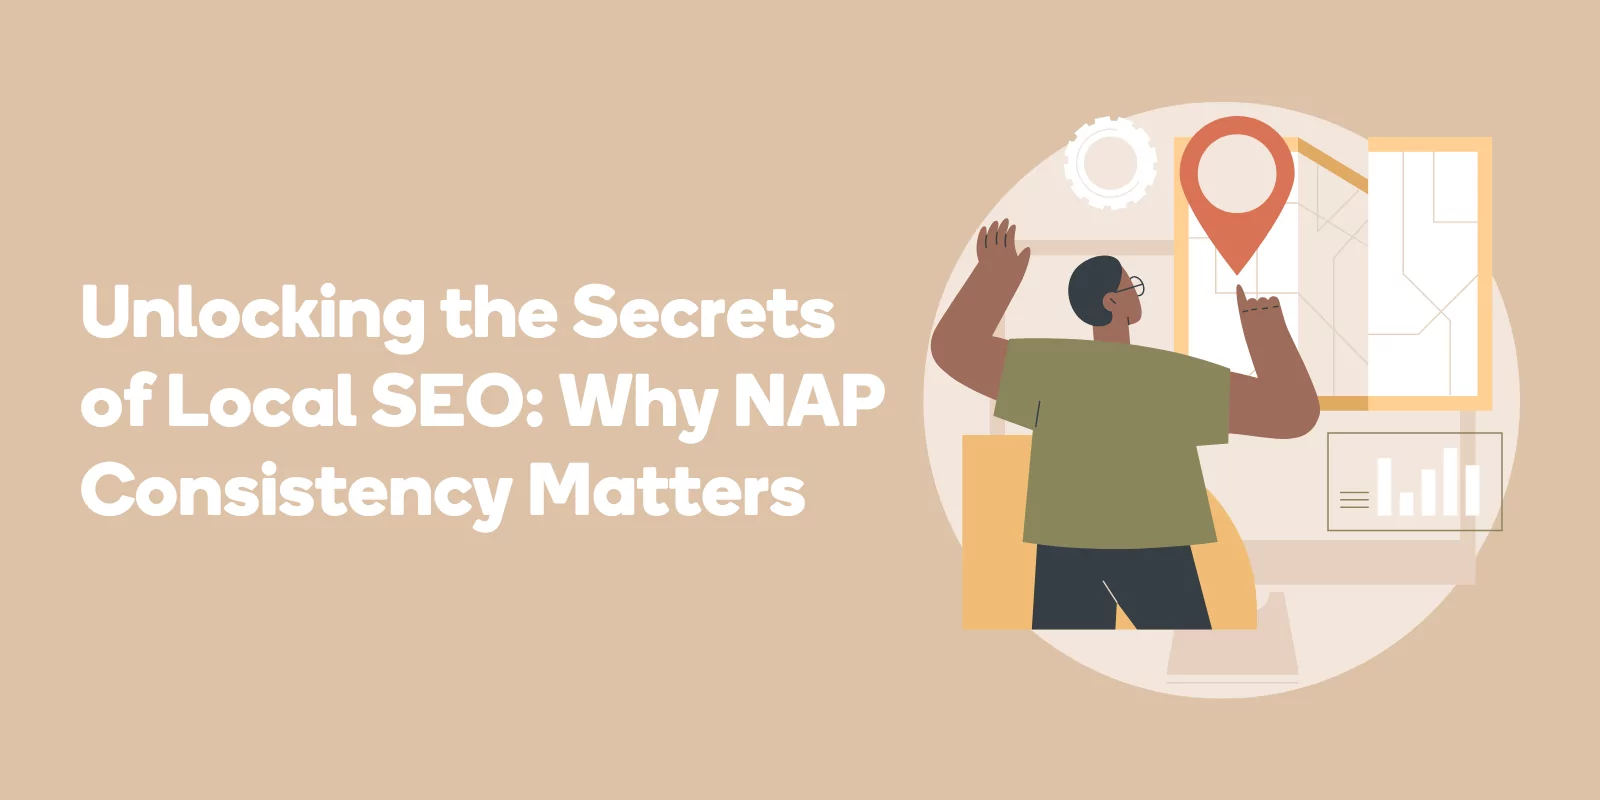 Unlocking the Secrets of Local SEO: Why NAP Consistency Matters